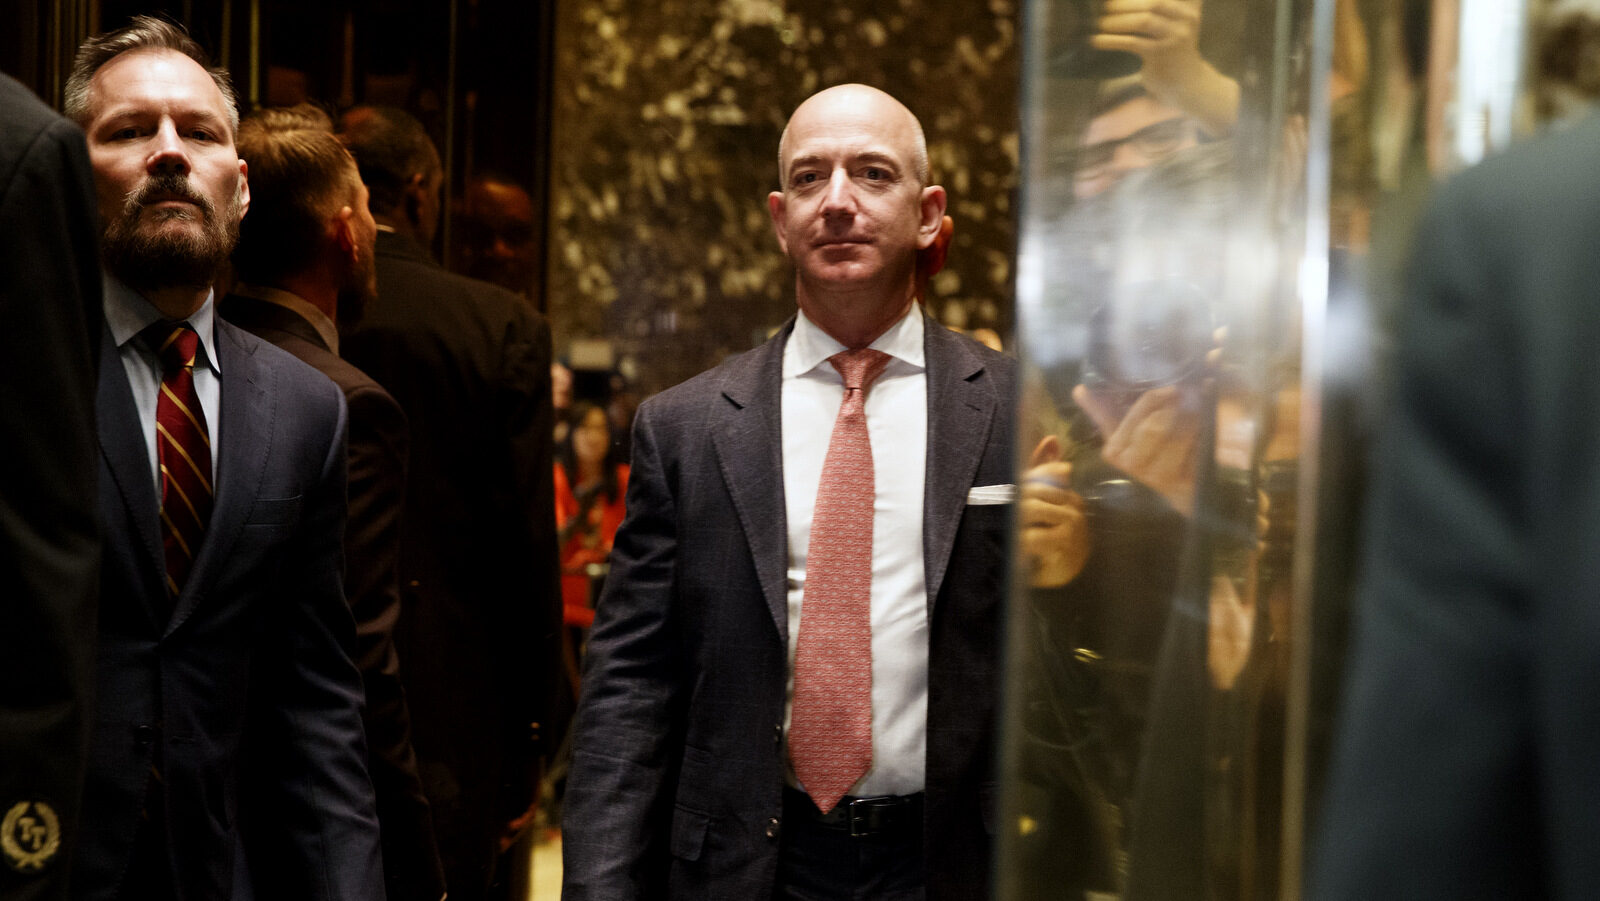 Amazon founder and Washington Post CEO Jeff Bezos gets on an elevator for a meeting between President-elect Donald Trump and technology industry leaders at Trump Tower in New York, Wednesday, Dec. 14, 2016. (AP/Evan Vucci)